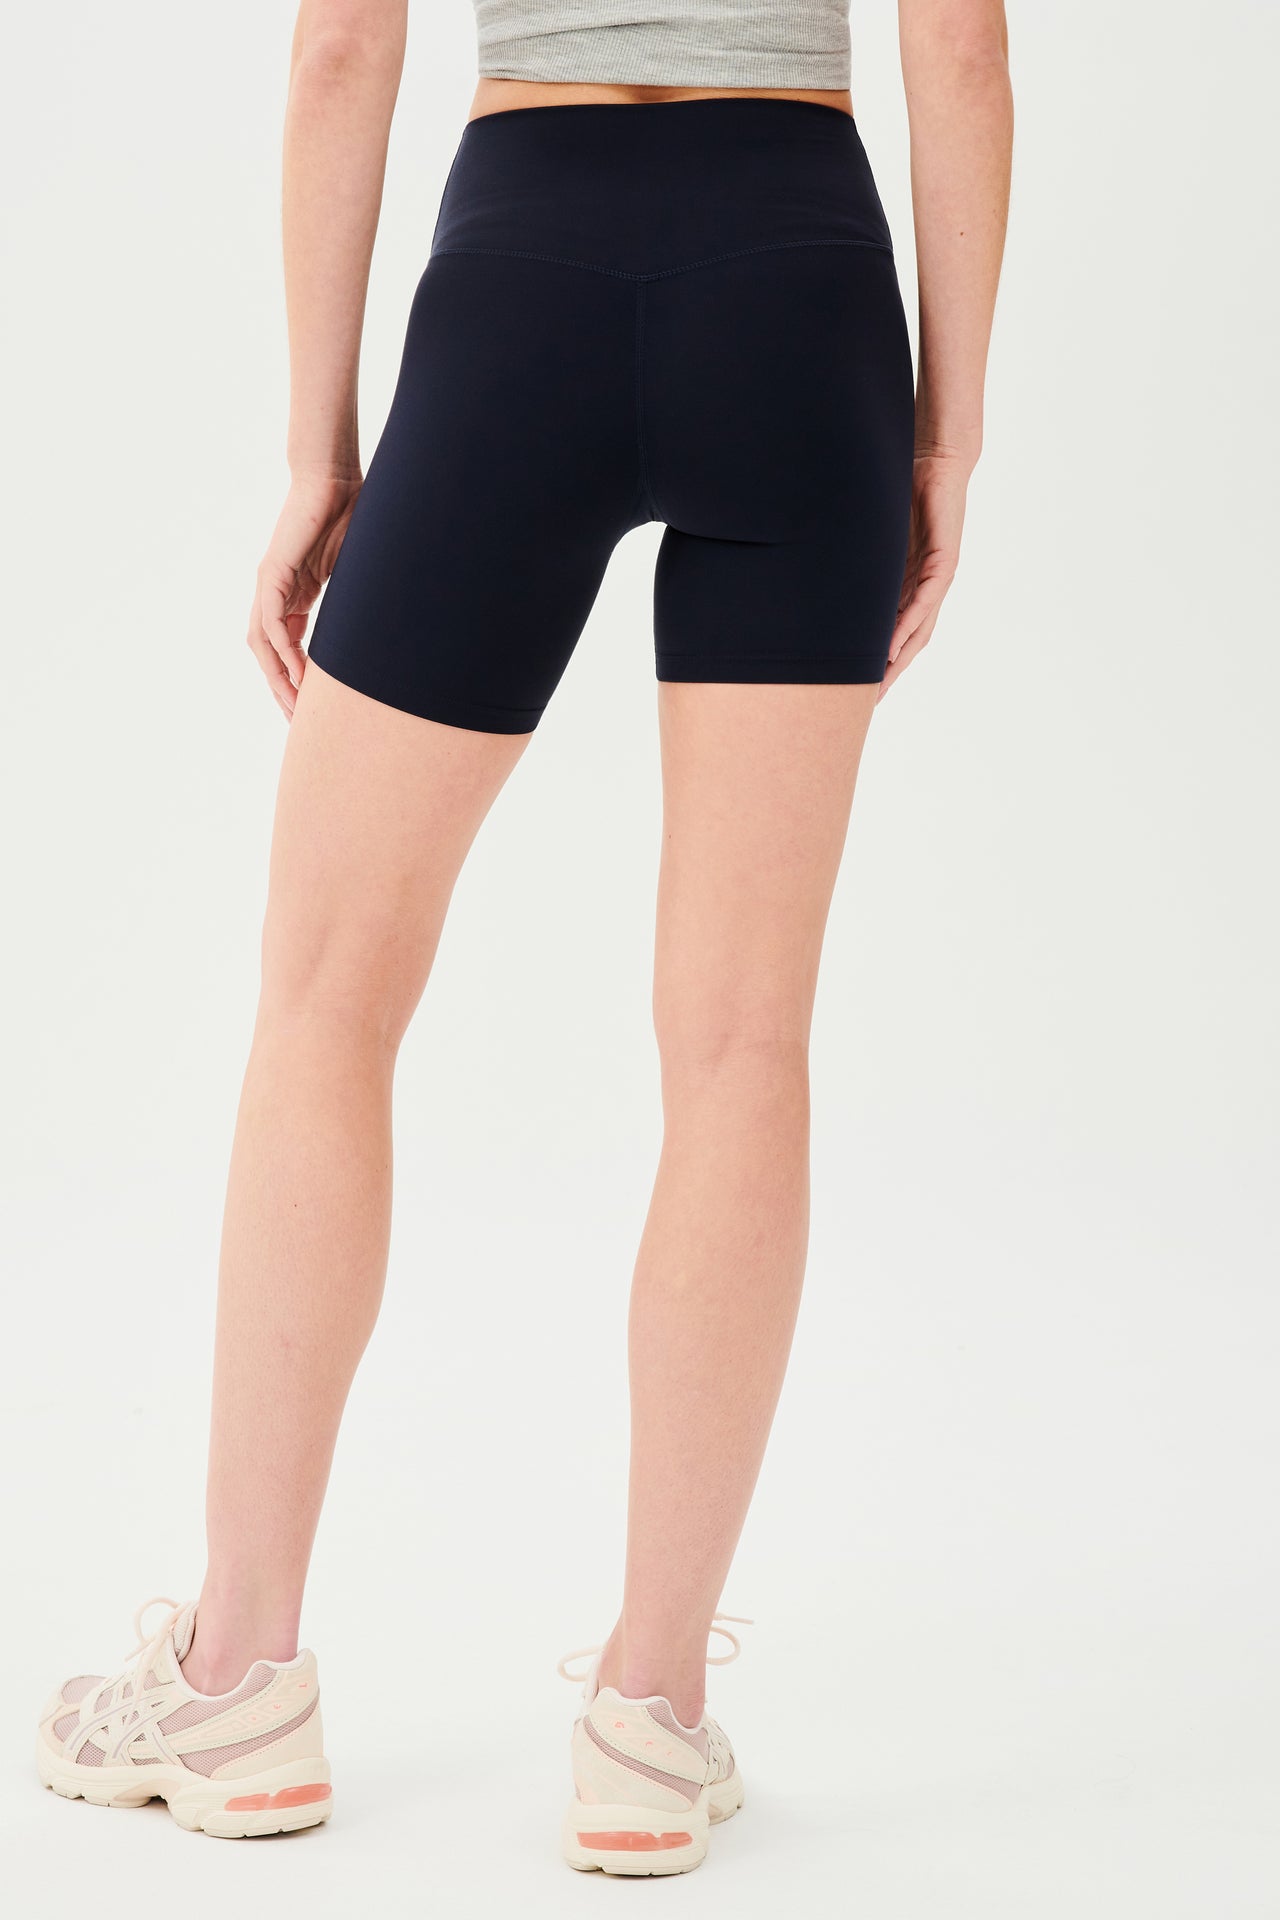 Back view of girl wearing highwaisted mid thigh dark blue bike shorts with white shoes